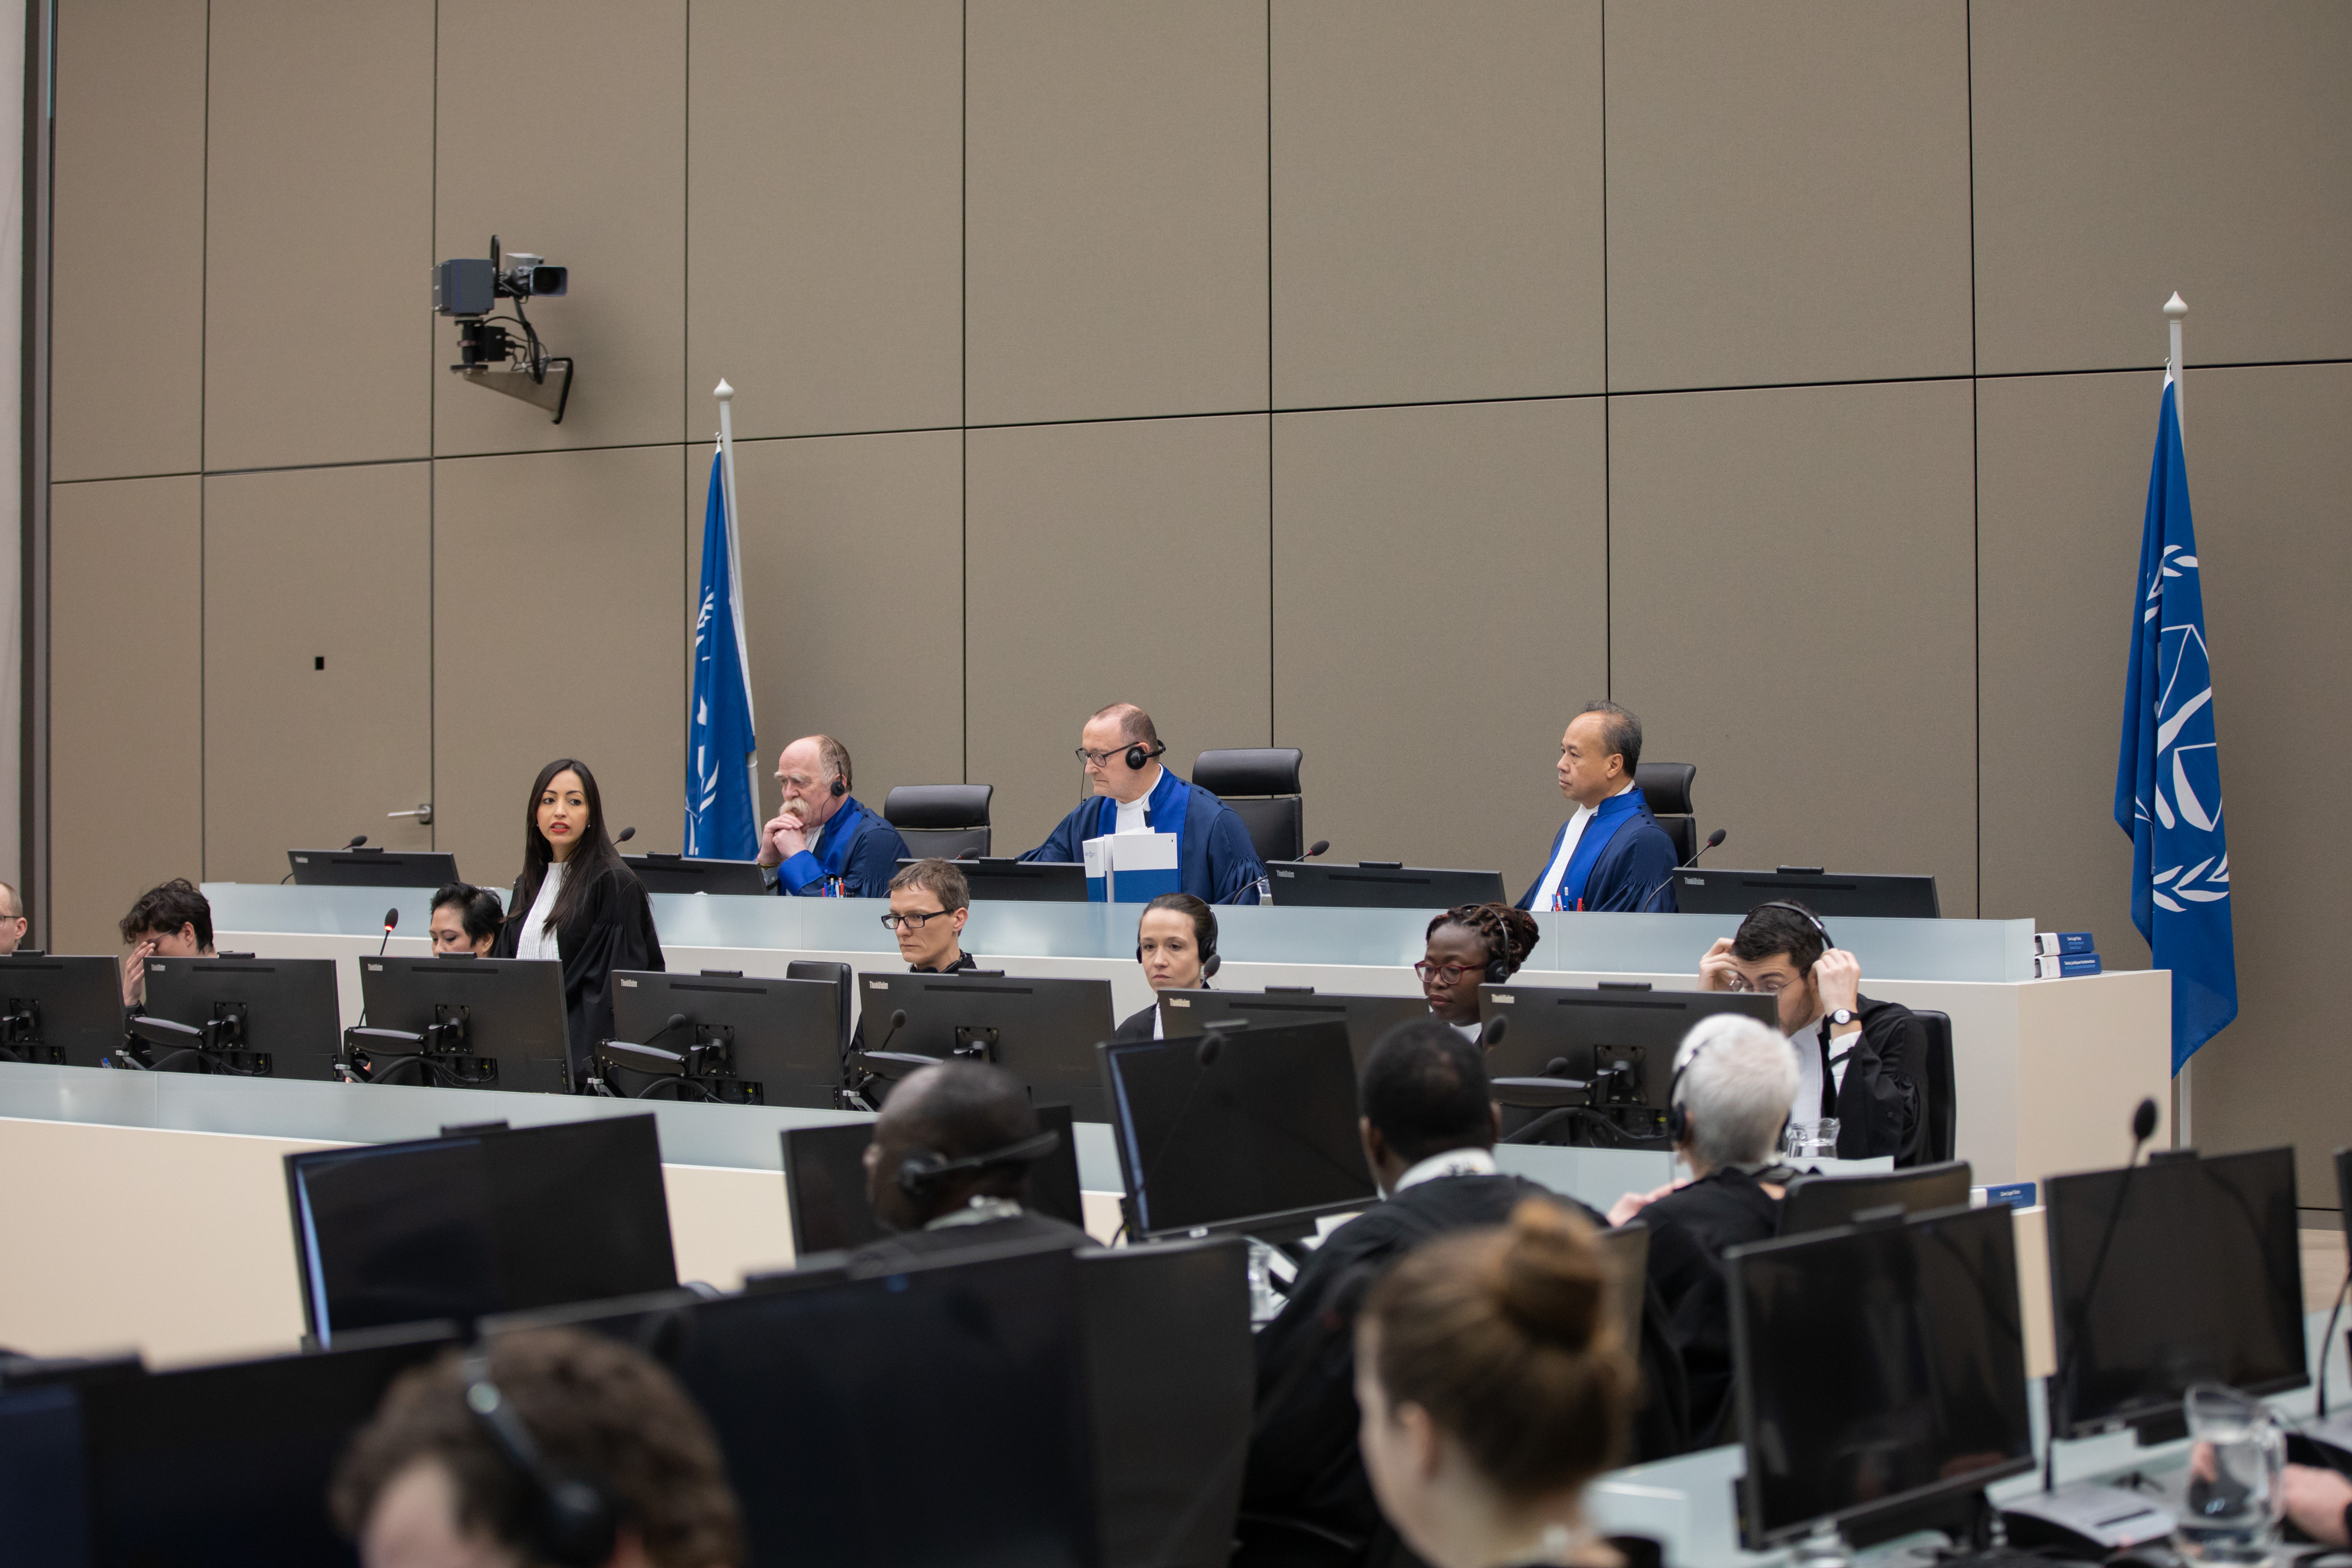 The judges of Trial Chamber IX (left to right) Judge Péter Kovács, Judge Bertram Schmitt, Presiding Judge, and Judge Raul Cano Pangalangan on 10 March 2020 at the International Criminal Court in The Hague (Netherlands) ©ICC-CPI